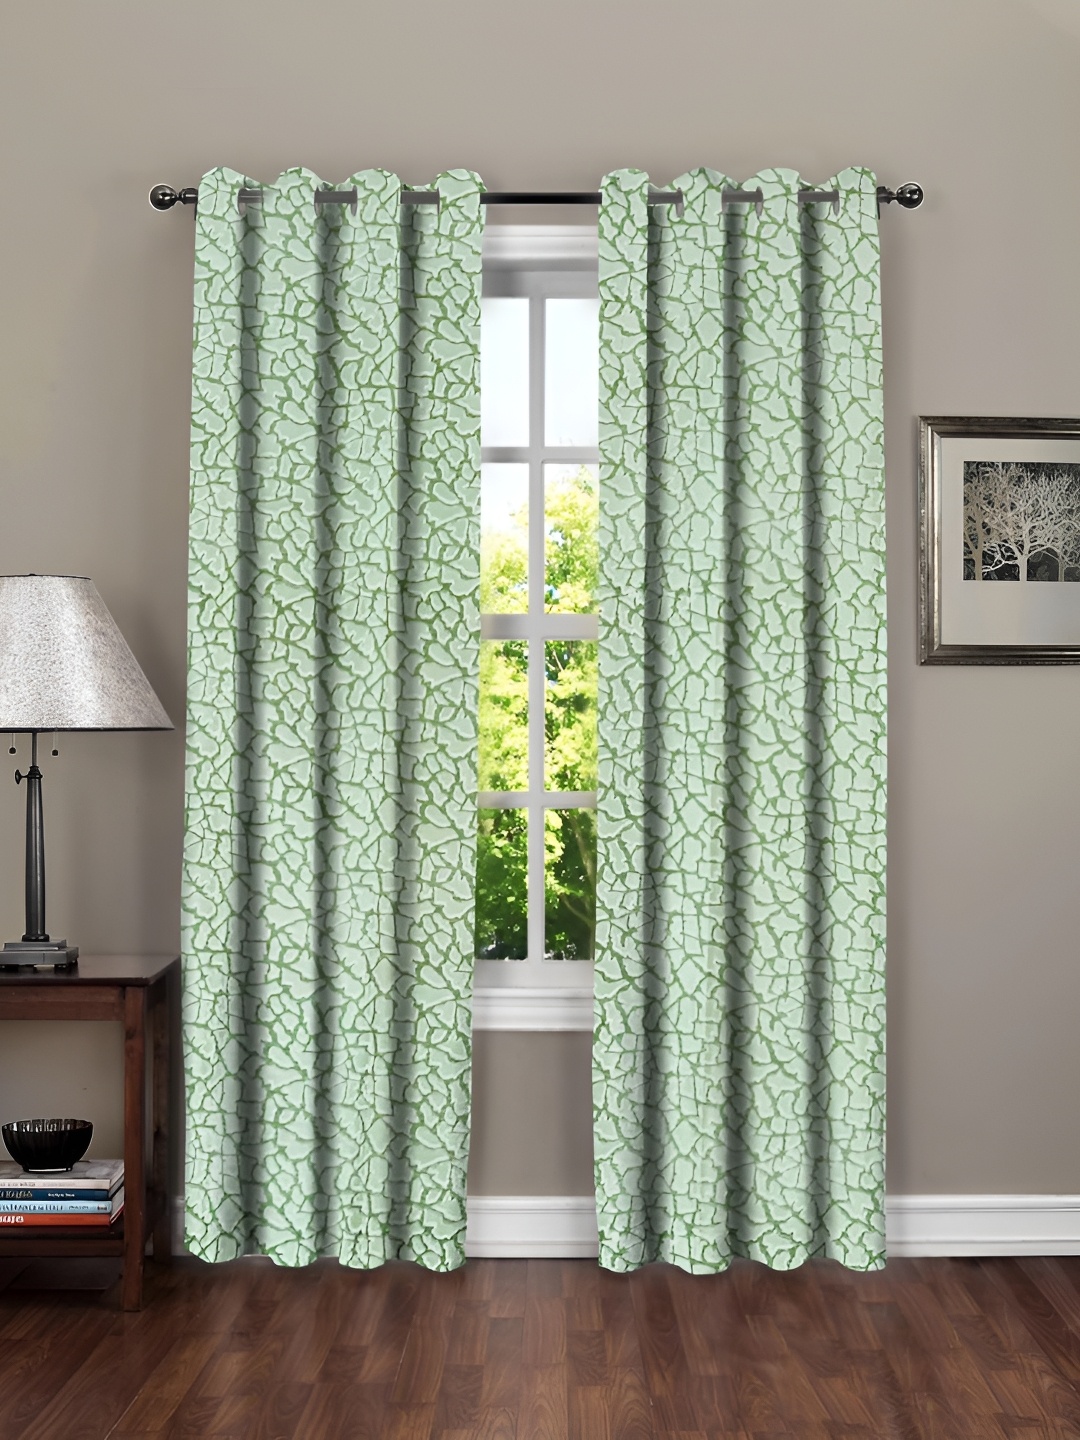 

RRC Green & White 2 Pieces Abstract Printed Microfiber Cotton Room Darkening Door Curtains